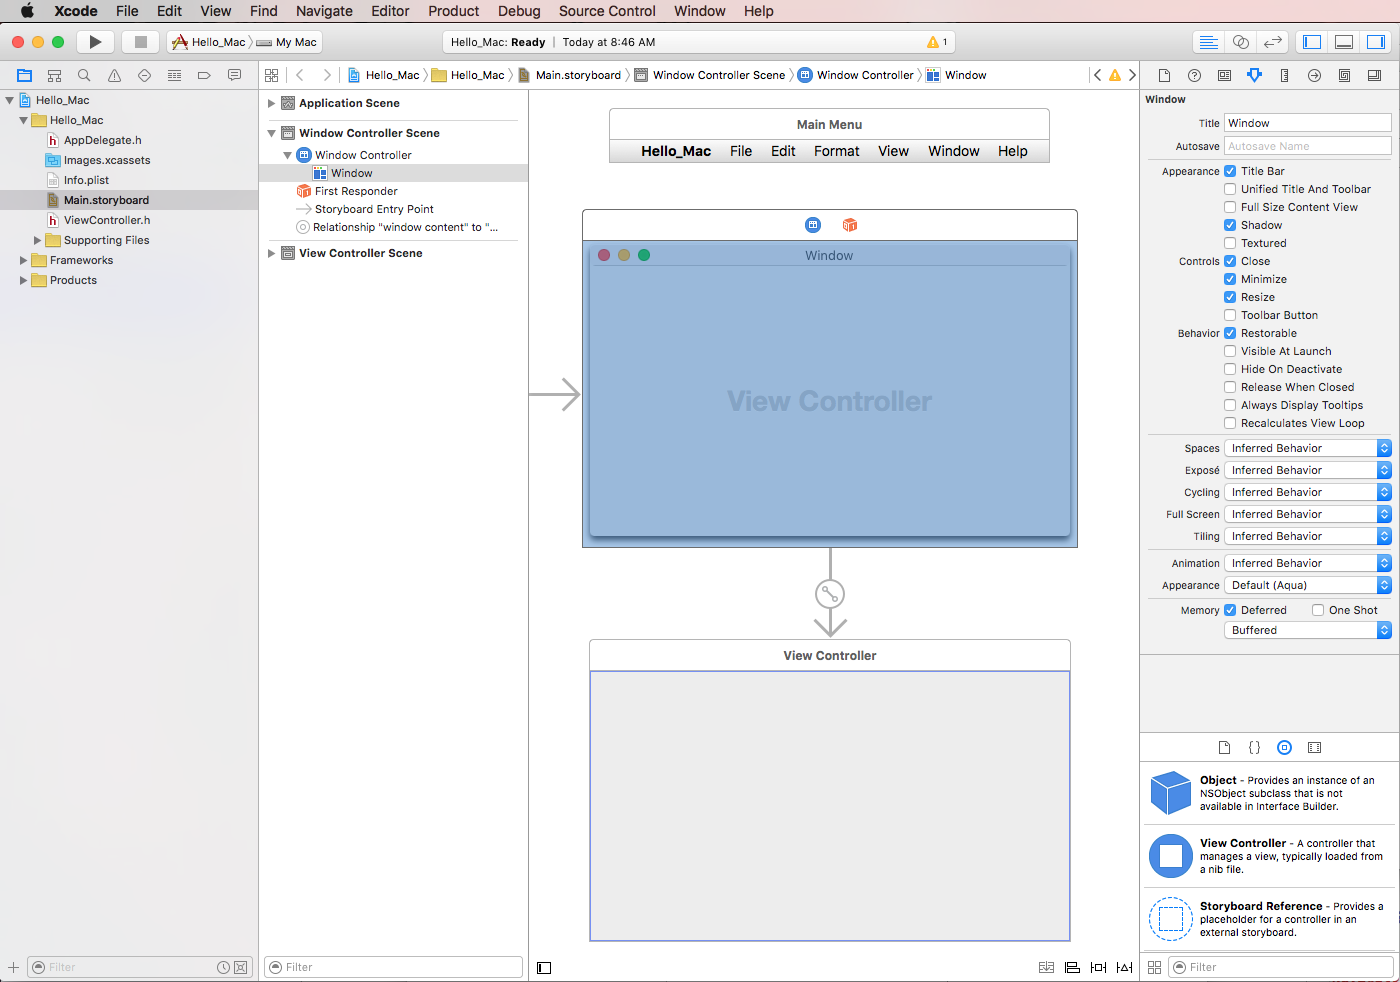 The default Xcode Interface Builder view